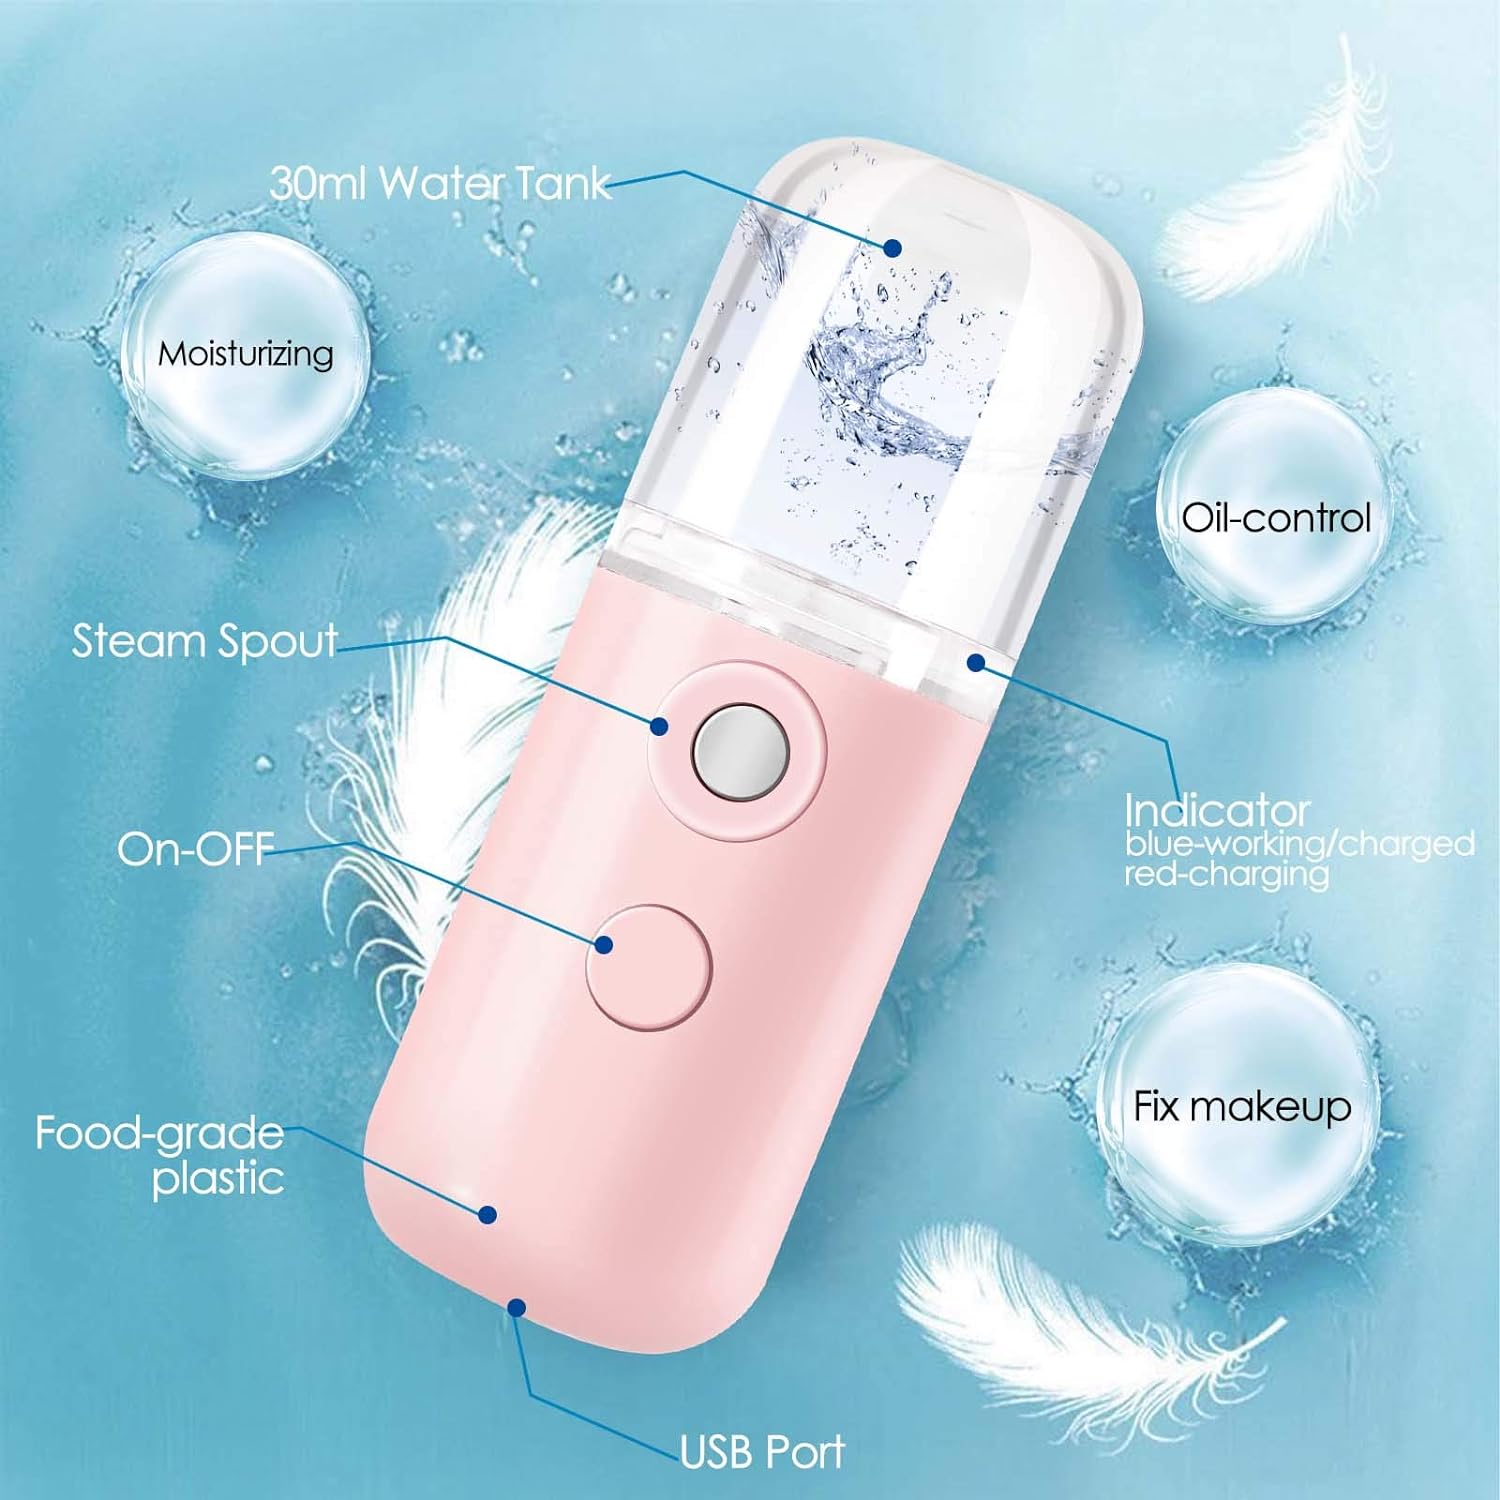 GIVERARE Nano Facial Steamer, Handy Mini Mister, USB Rechargeable Mist Sprayer, 30ml Visual Water Tank MoisturizingHydrating for Face, Daily Makeup, Skin Care, Eyelash Extensions-Pink